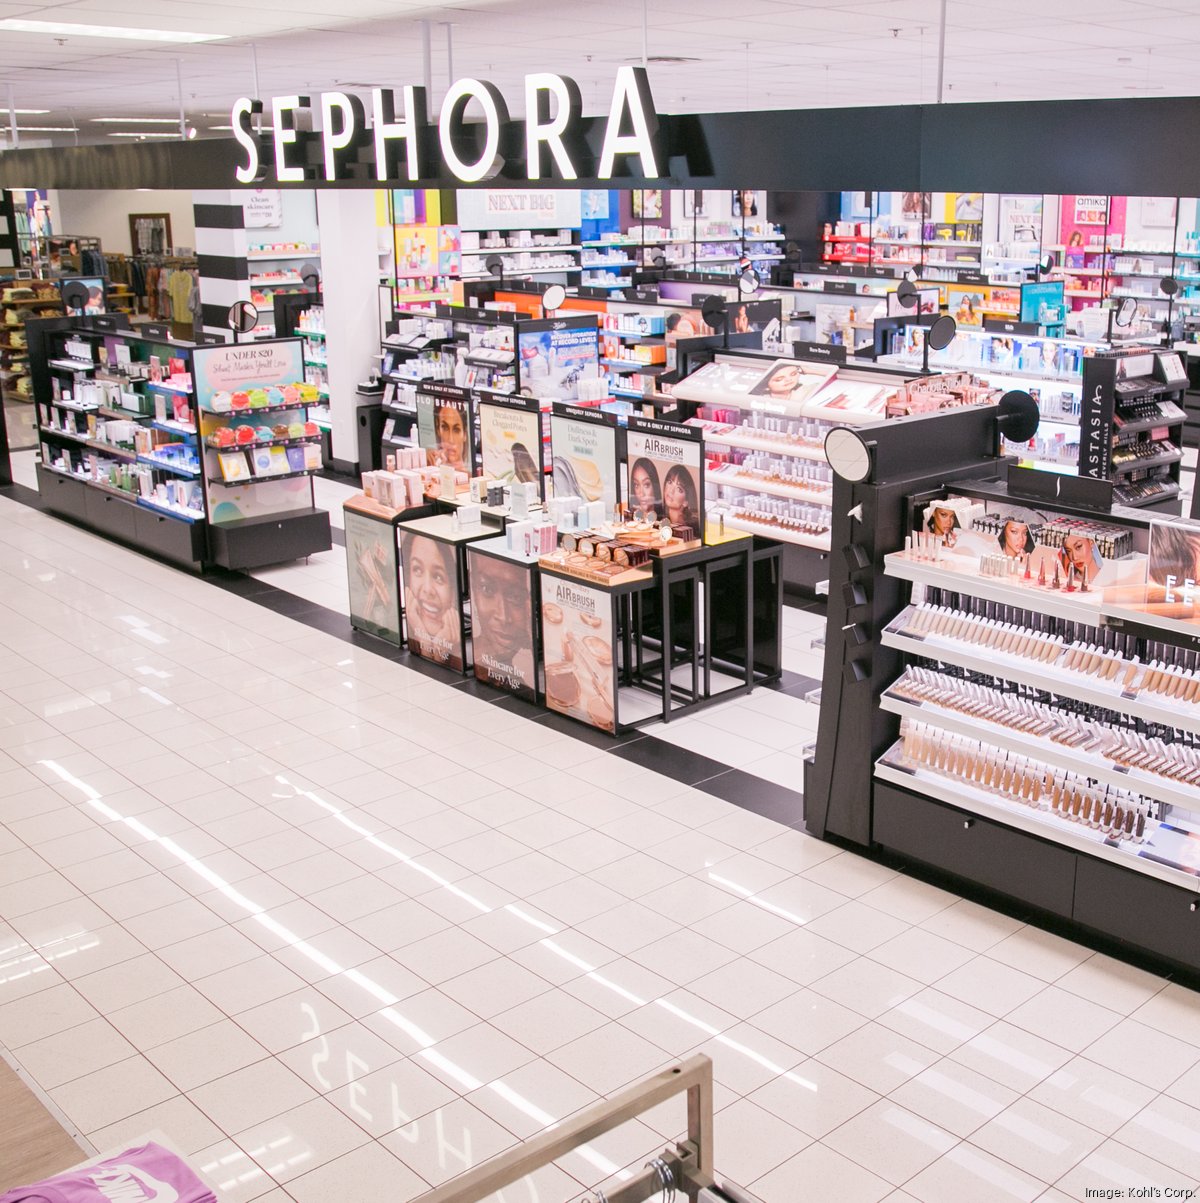 Kohl's (KSS) Expands Partnership With Sephora to Fuel Growth